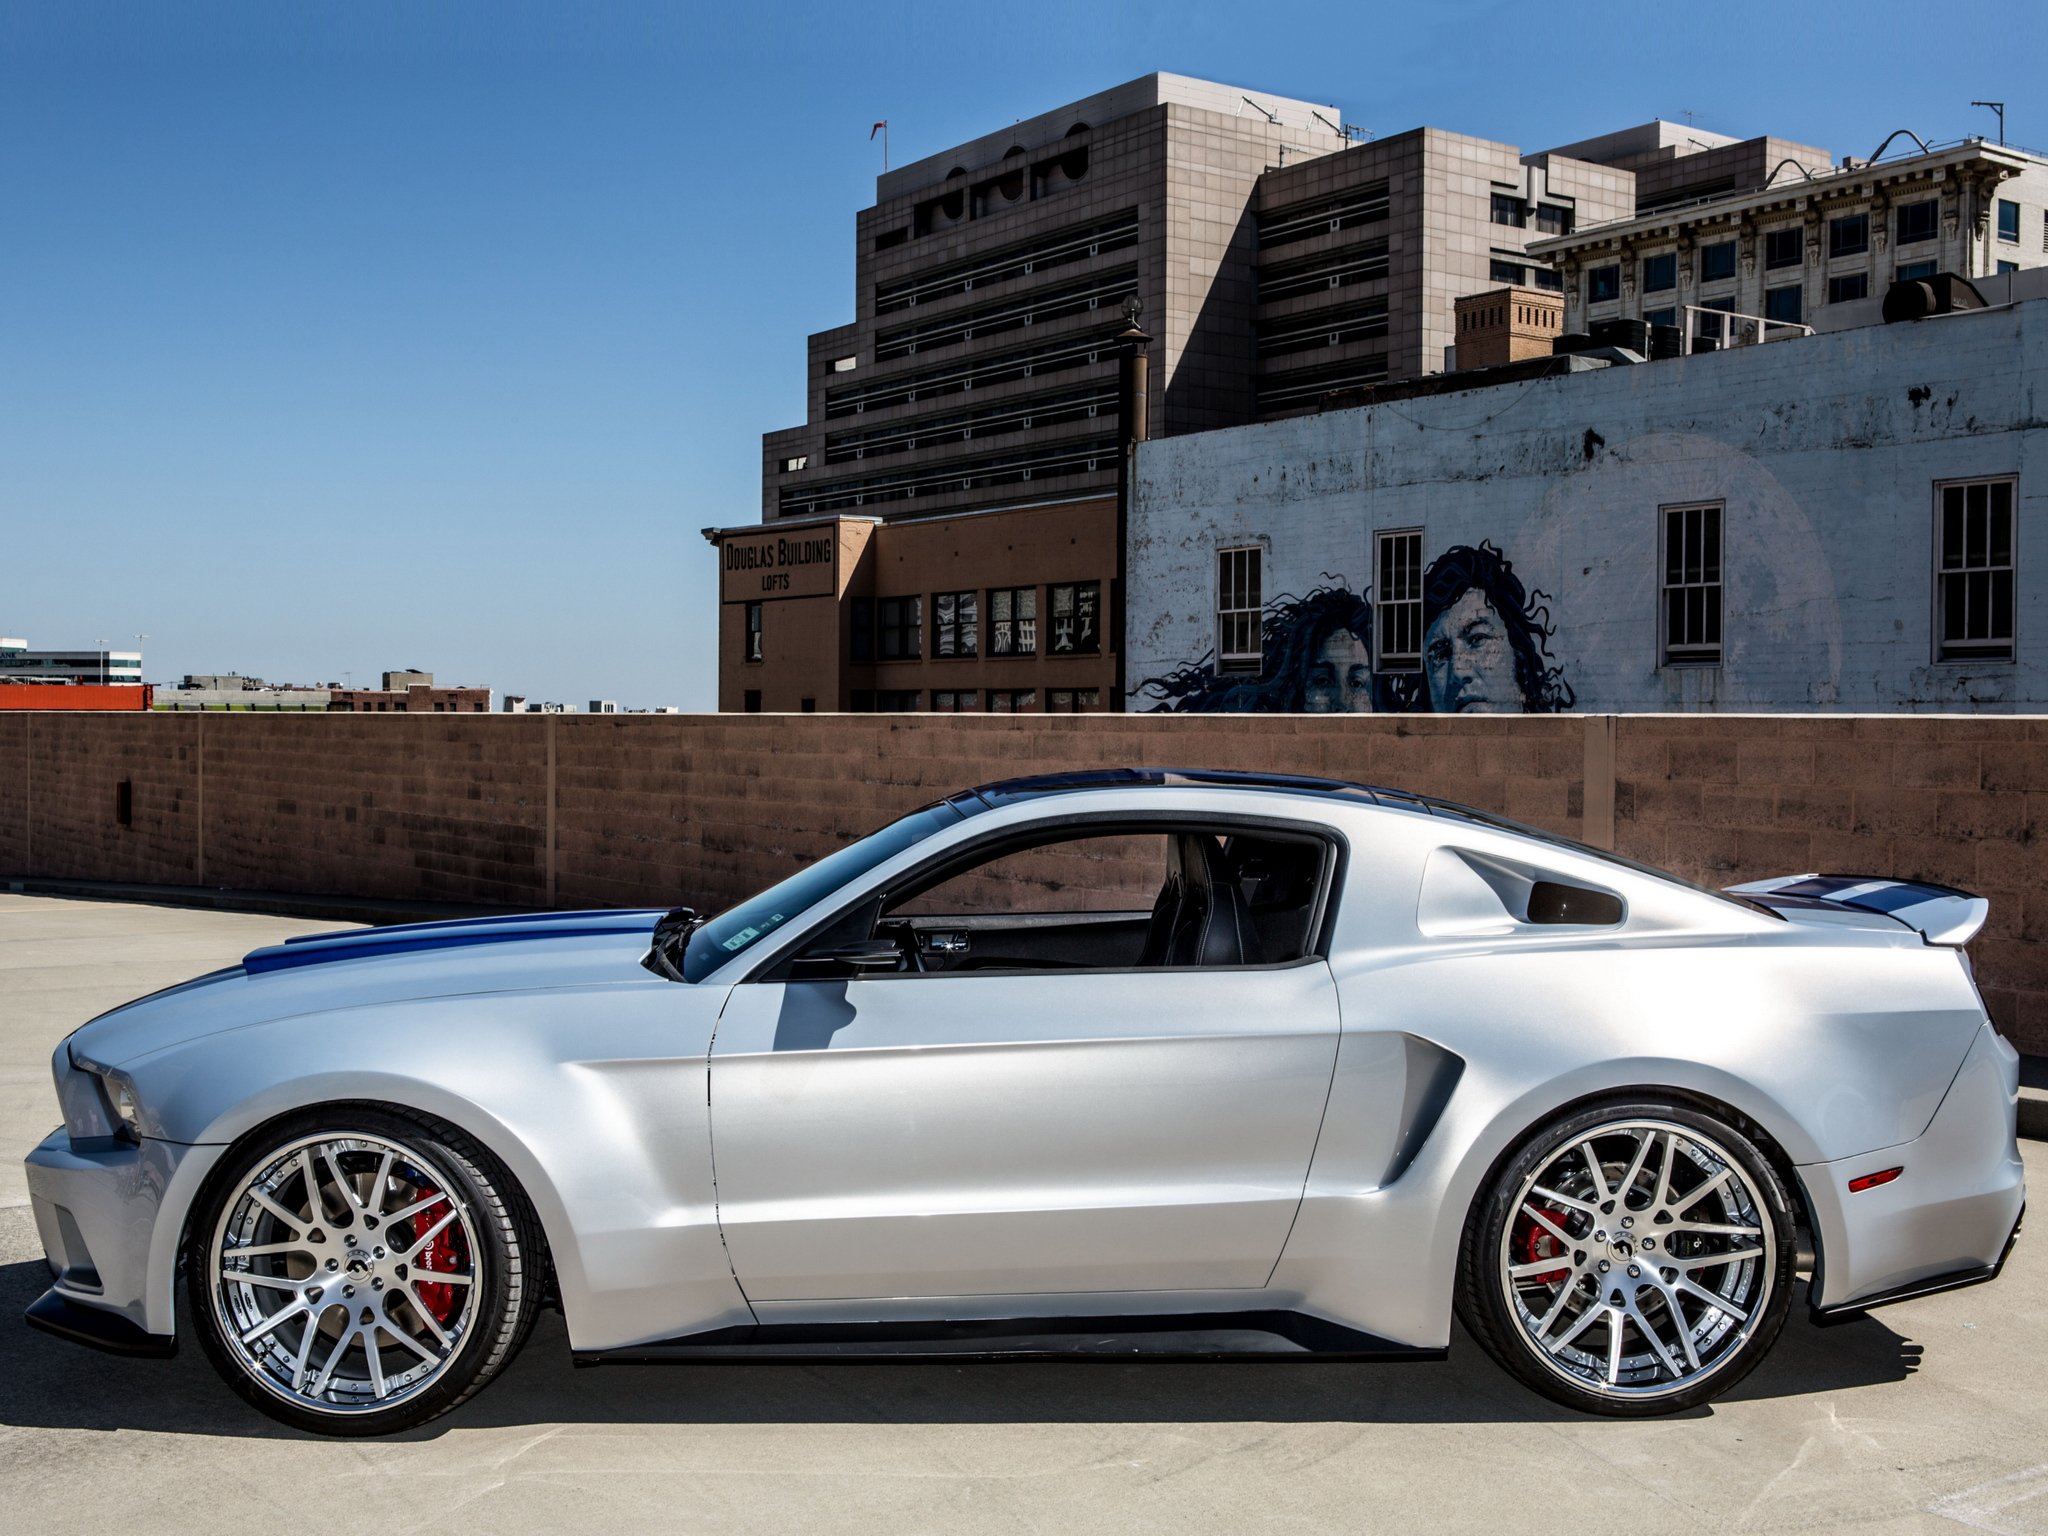 2014, Ford, Mustang, G t, Need, For, Speed, Movoe, Film, Supercar, Muscle, Hot, Rod, Rods, Tuning, Gh Wallpaper